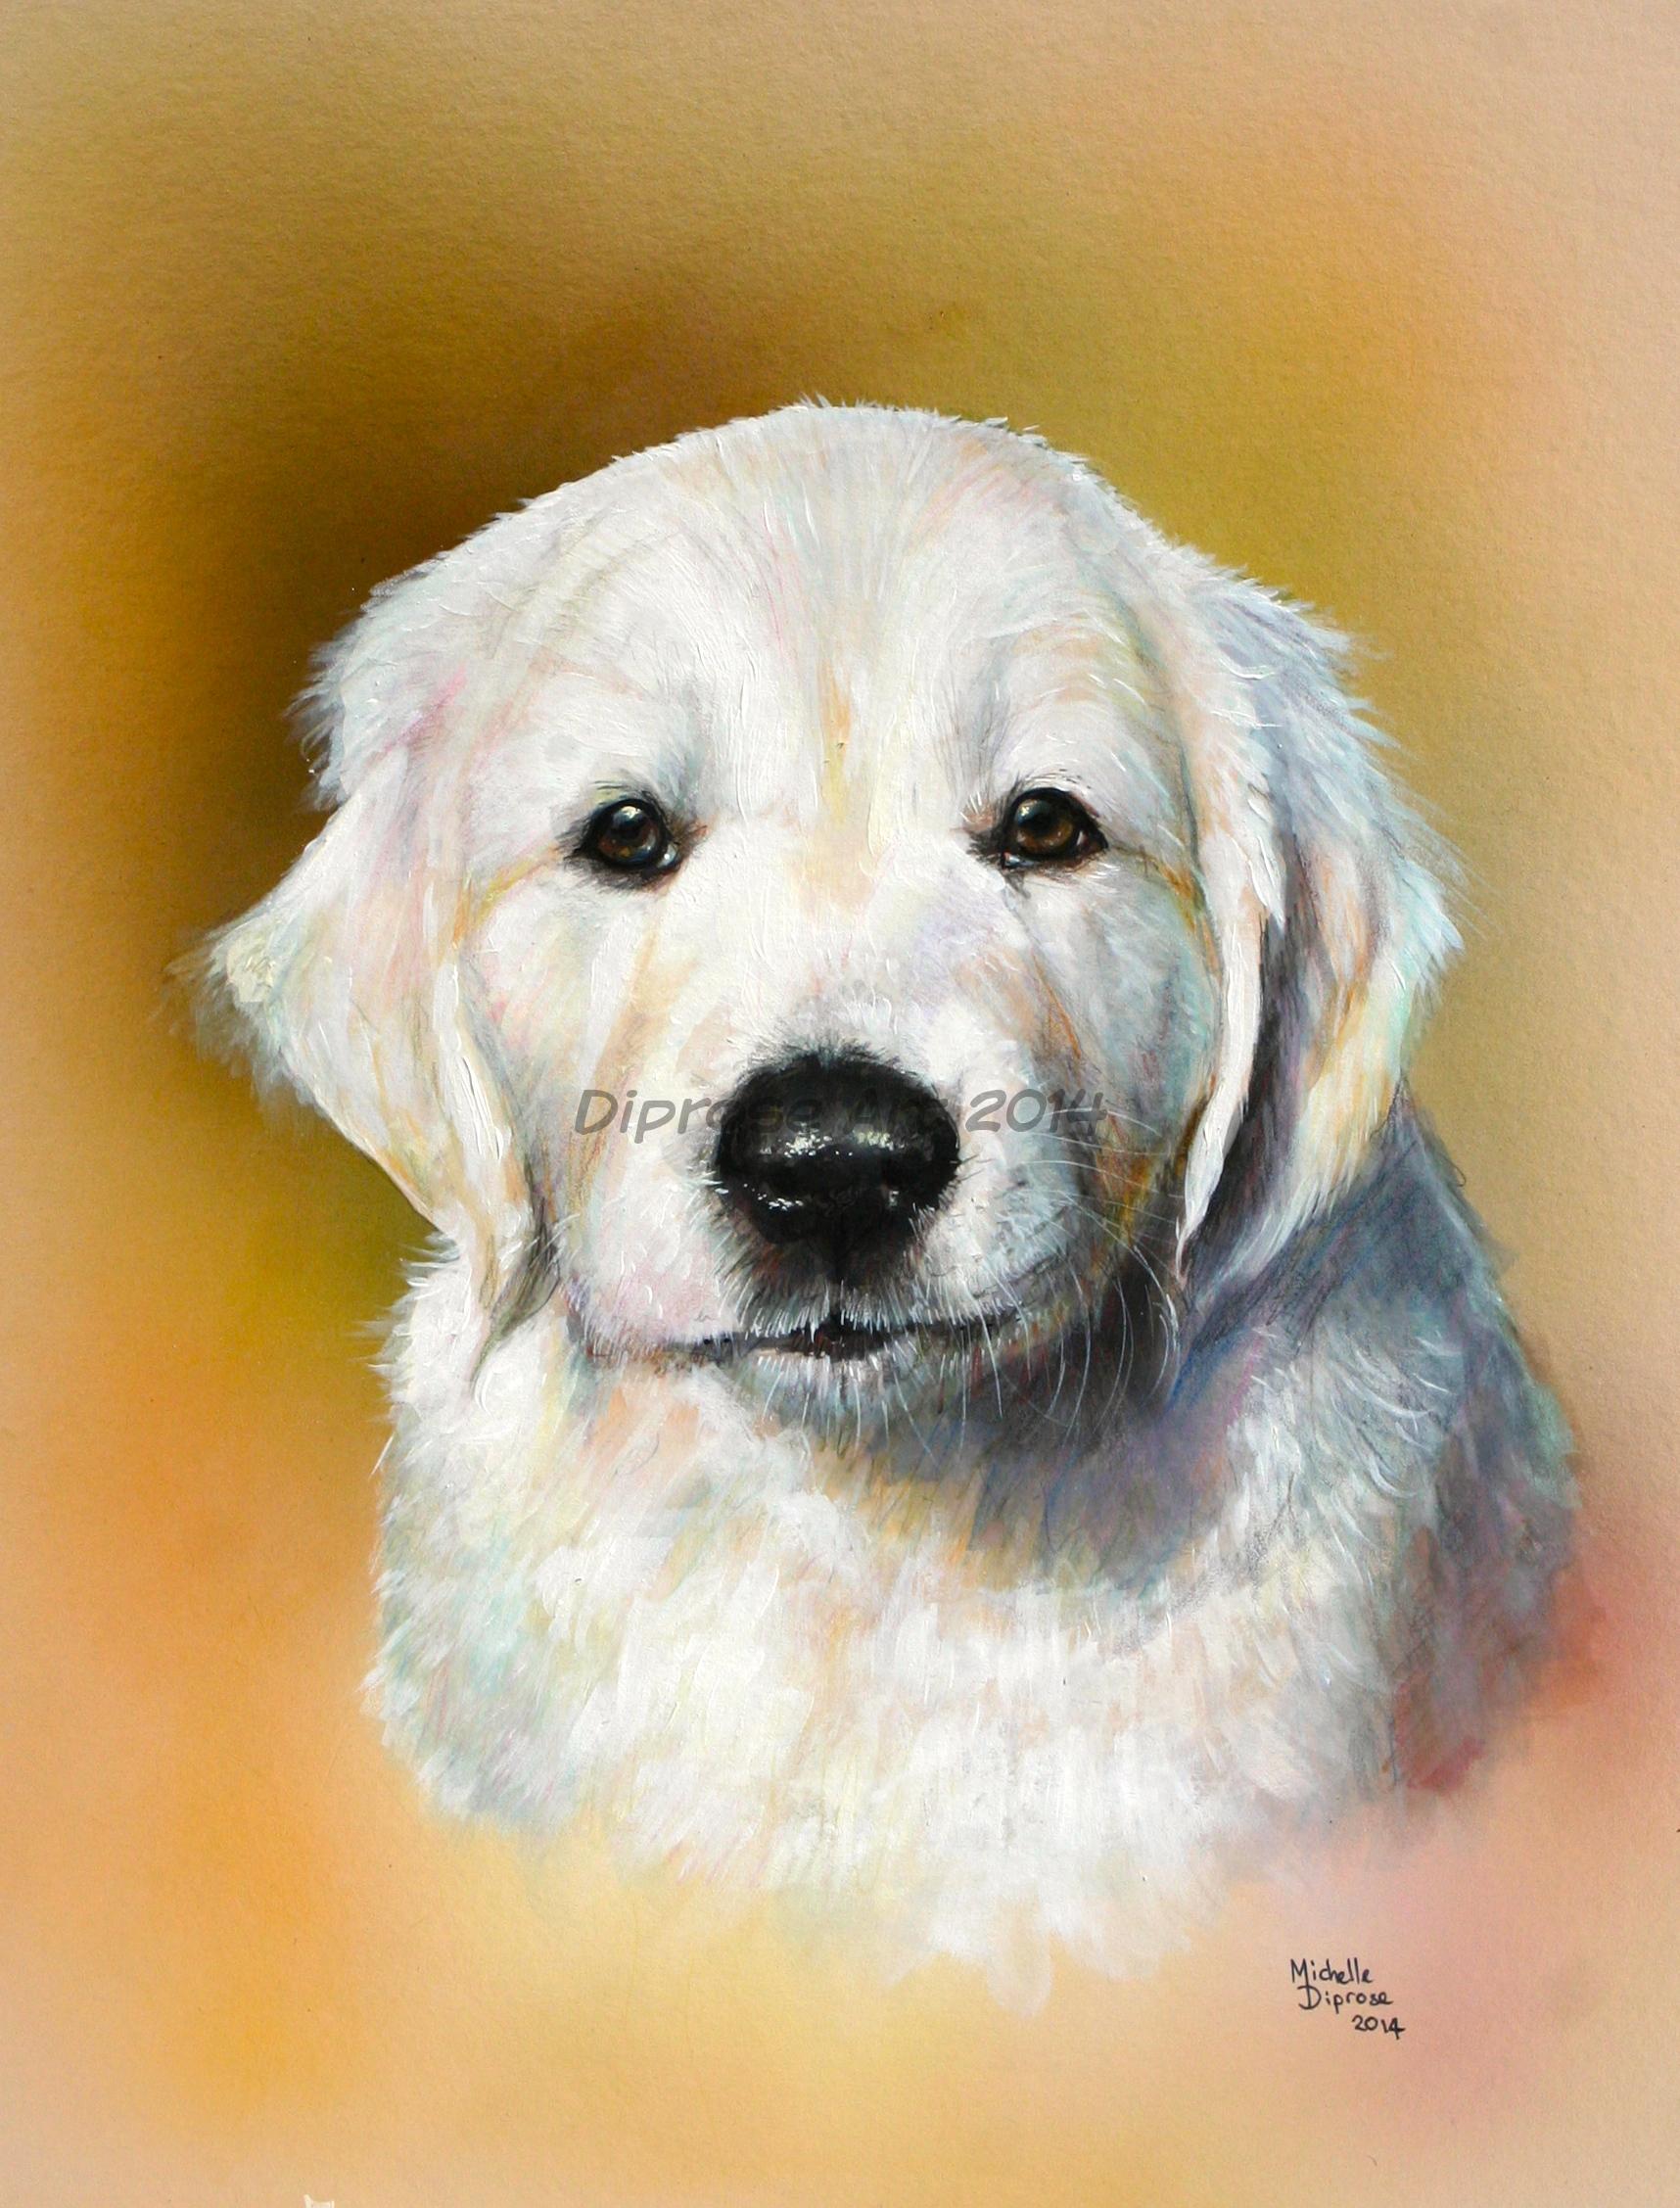 Acylics on board - approx A1 - pet dog portrait - The painting of this gorgeous puppy was a wedding present from a bride to her husband of their dog.